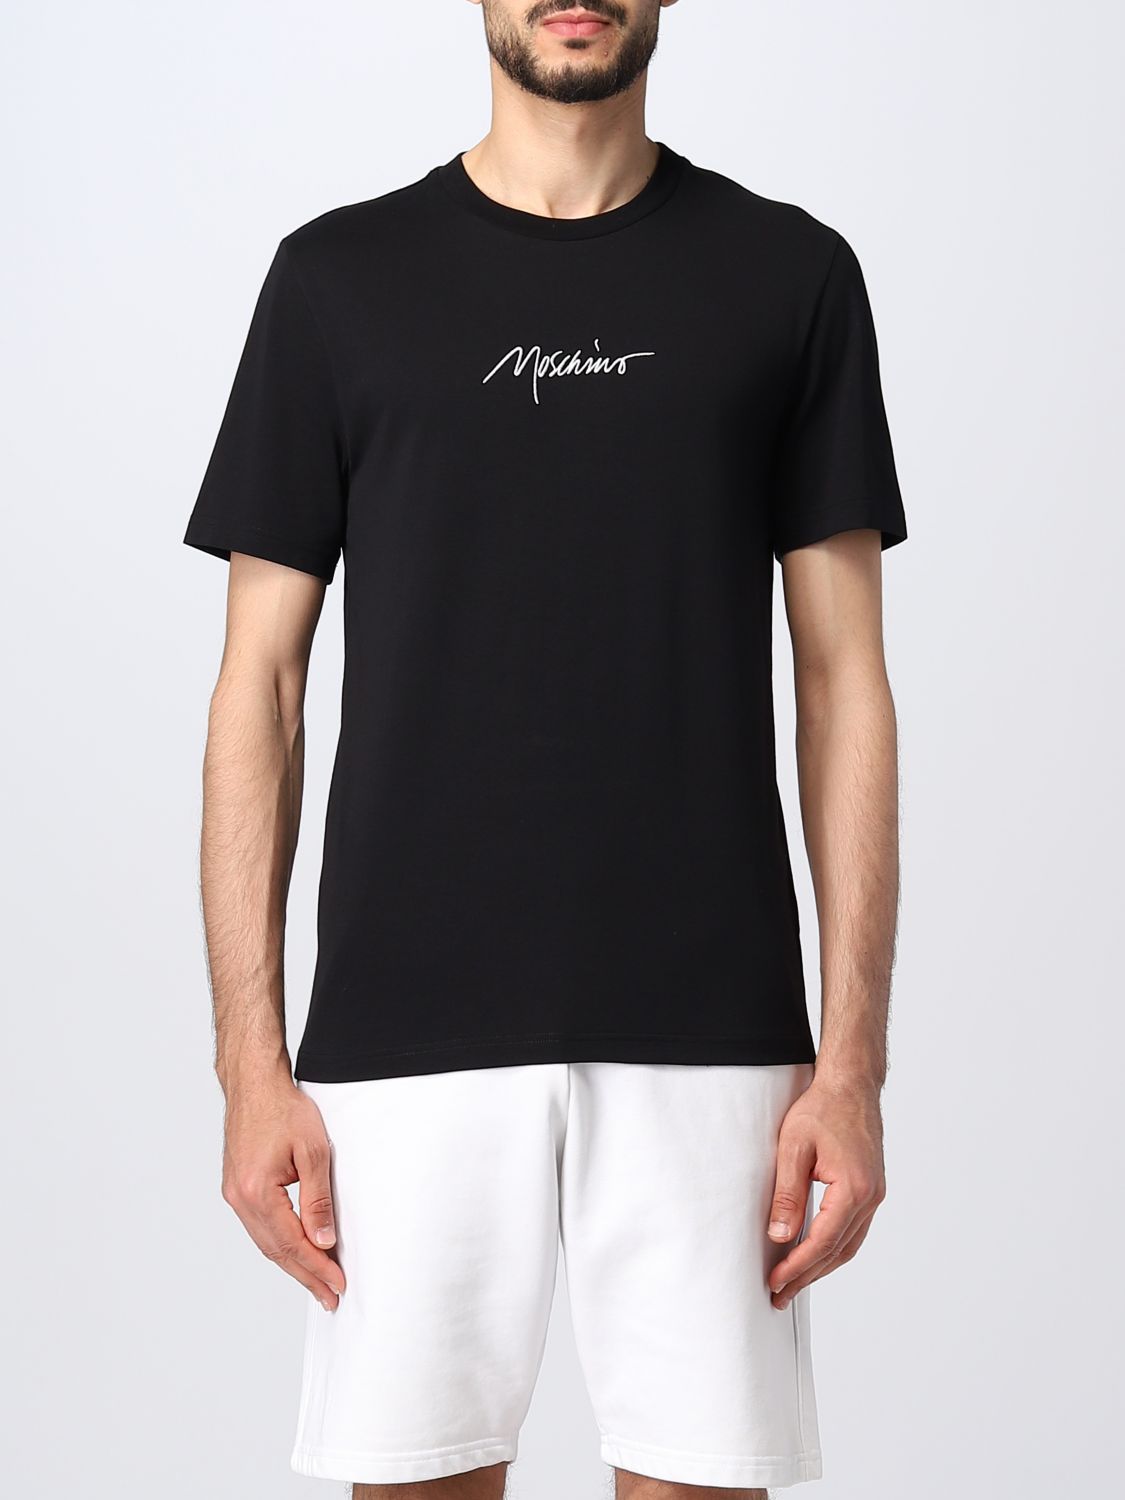 Moschino Couture T-shirt  Men Color Black